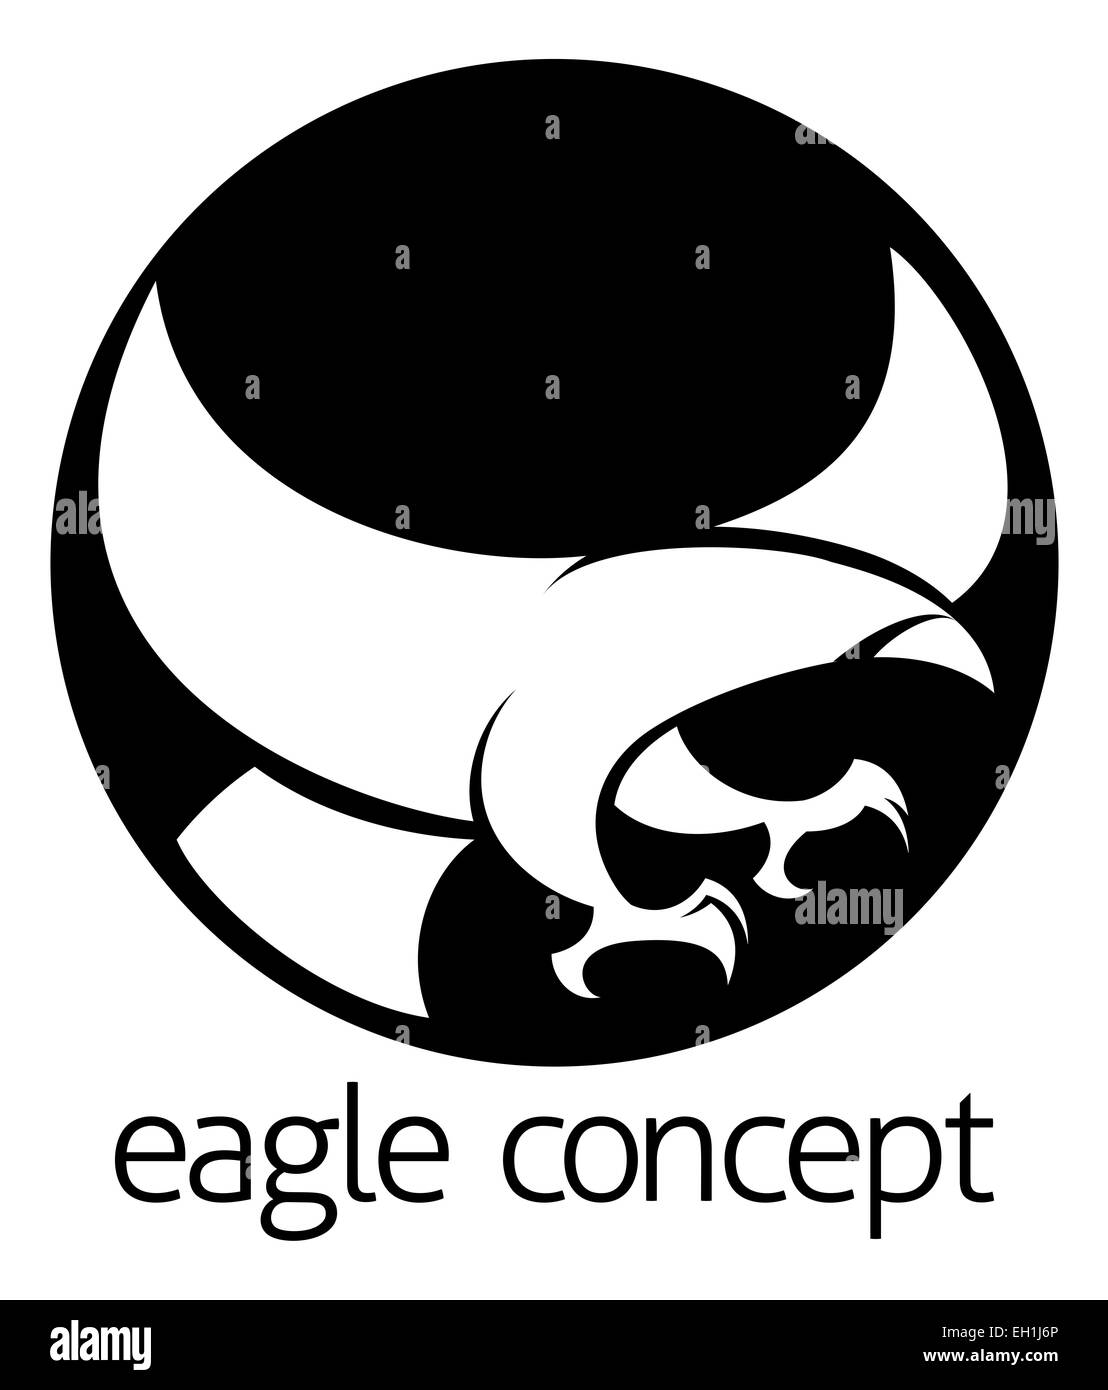 An abstract illustration of an eagle circle concept design Stock Photo